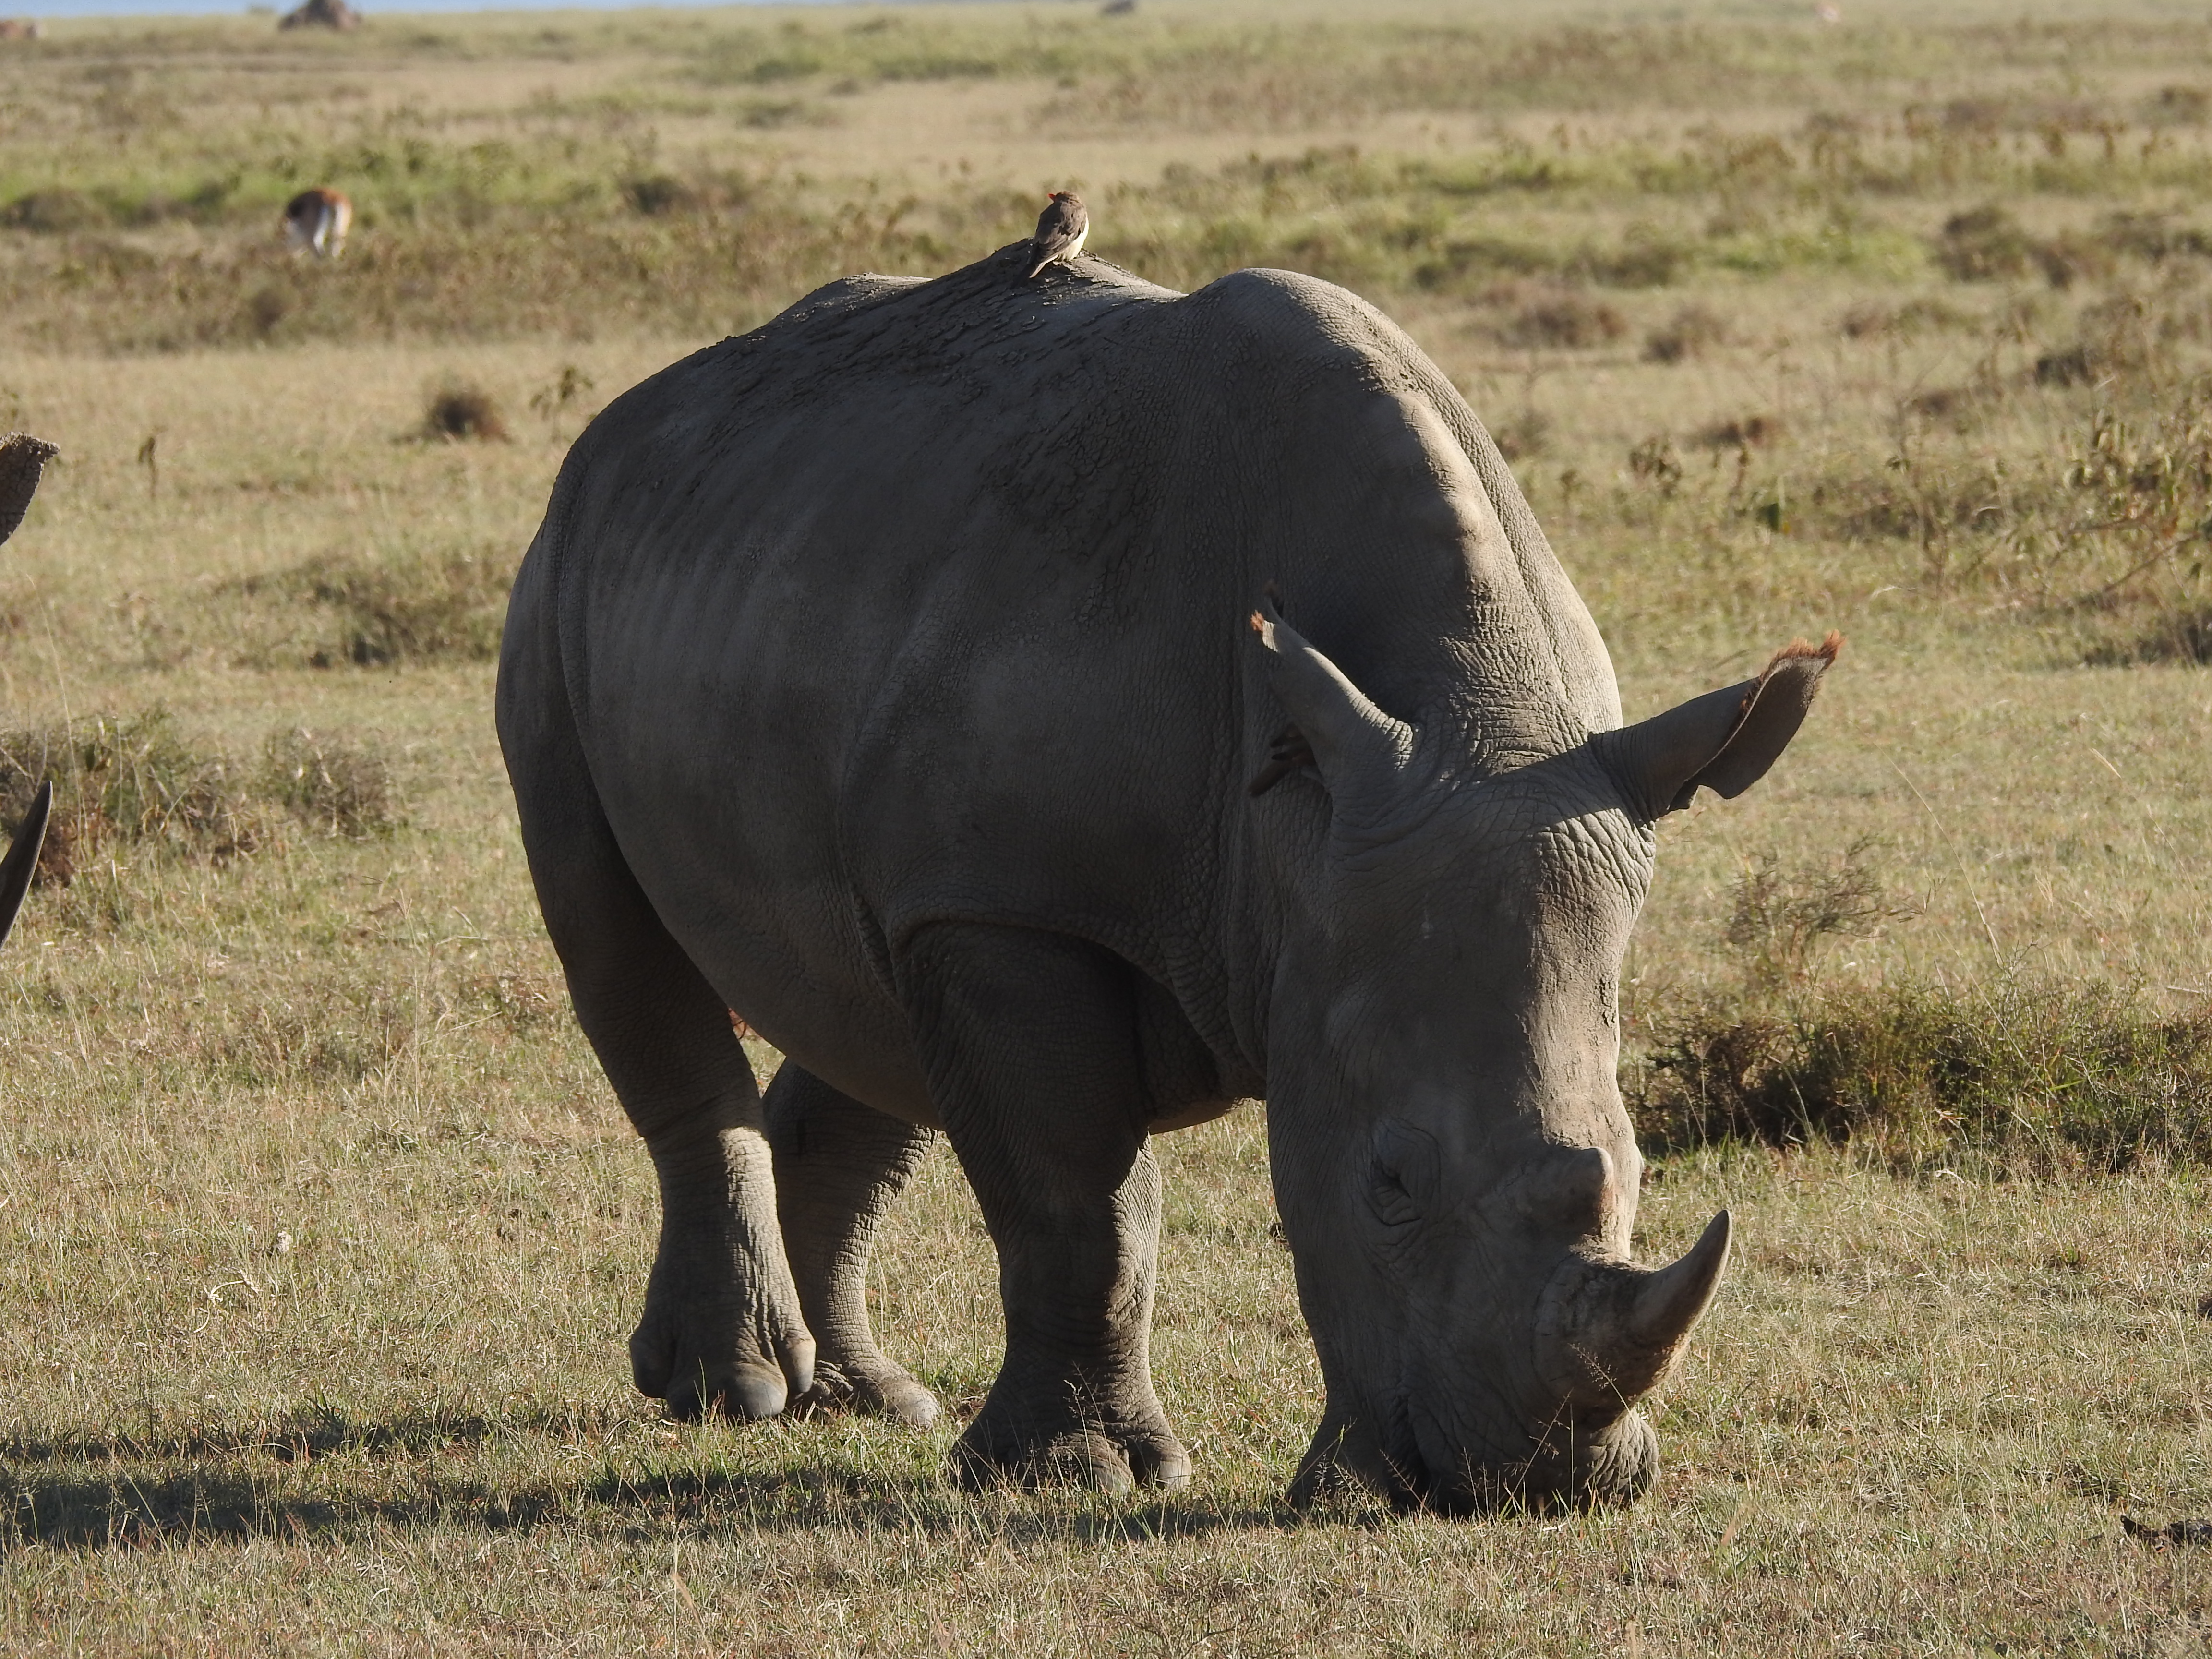 A day with Rhino, Rift Valley